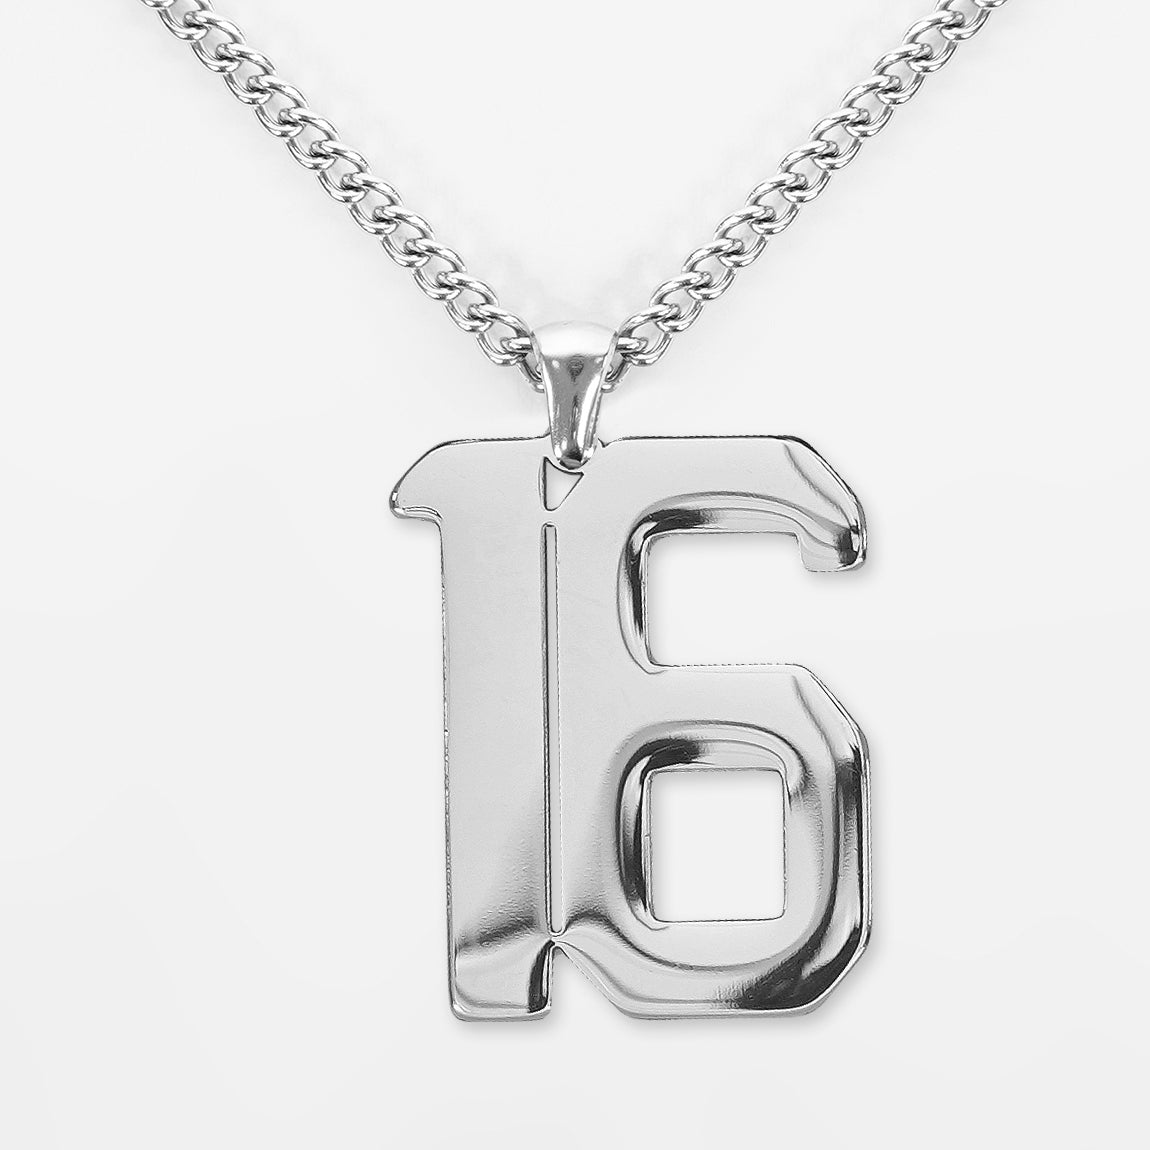 16 Number Pendant with Chain Necklace - Stainless Steel